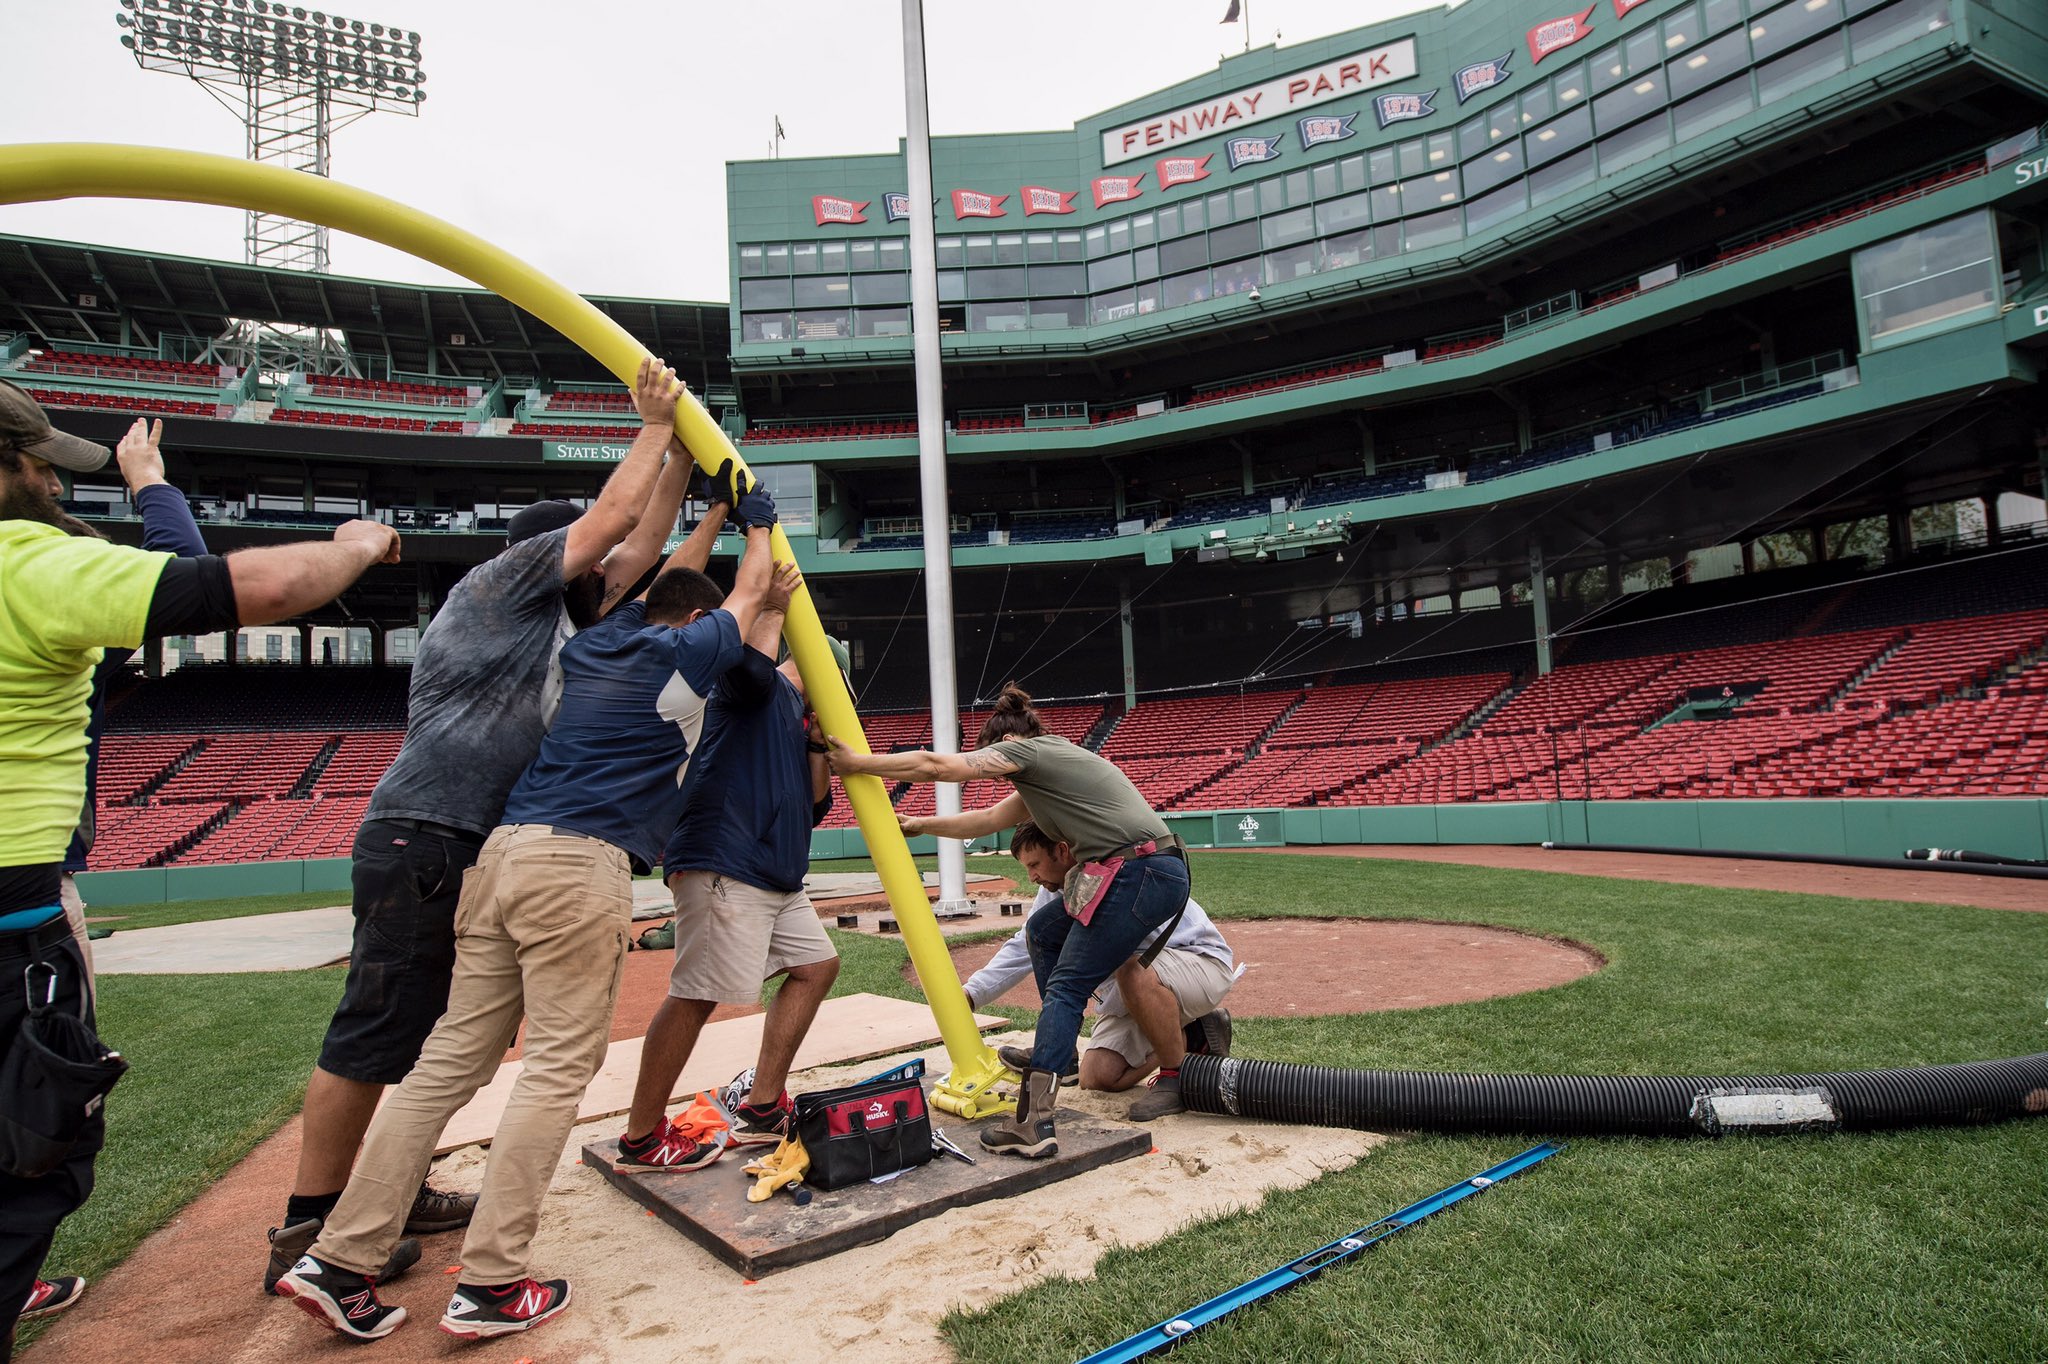 This Is How Fenway Park Was Transformed into a Football Field